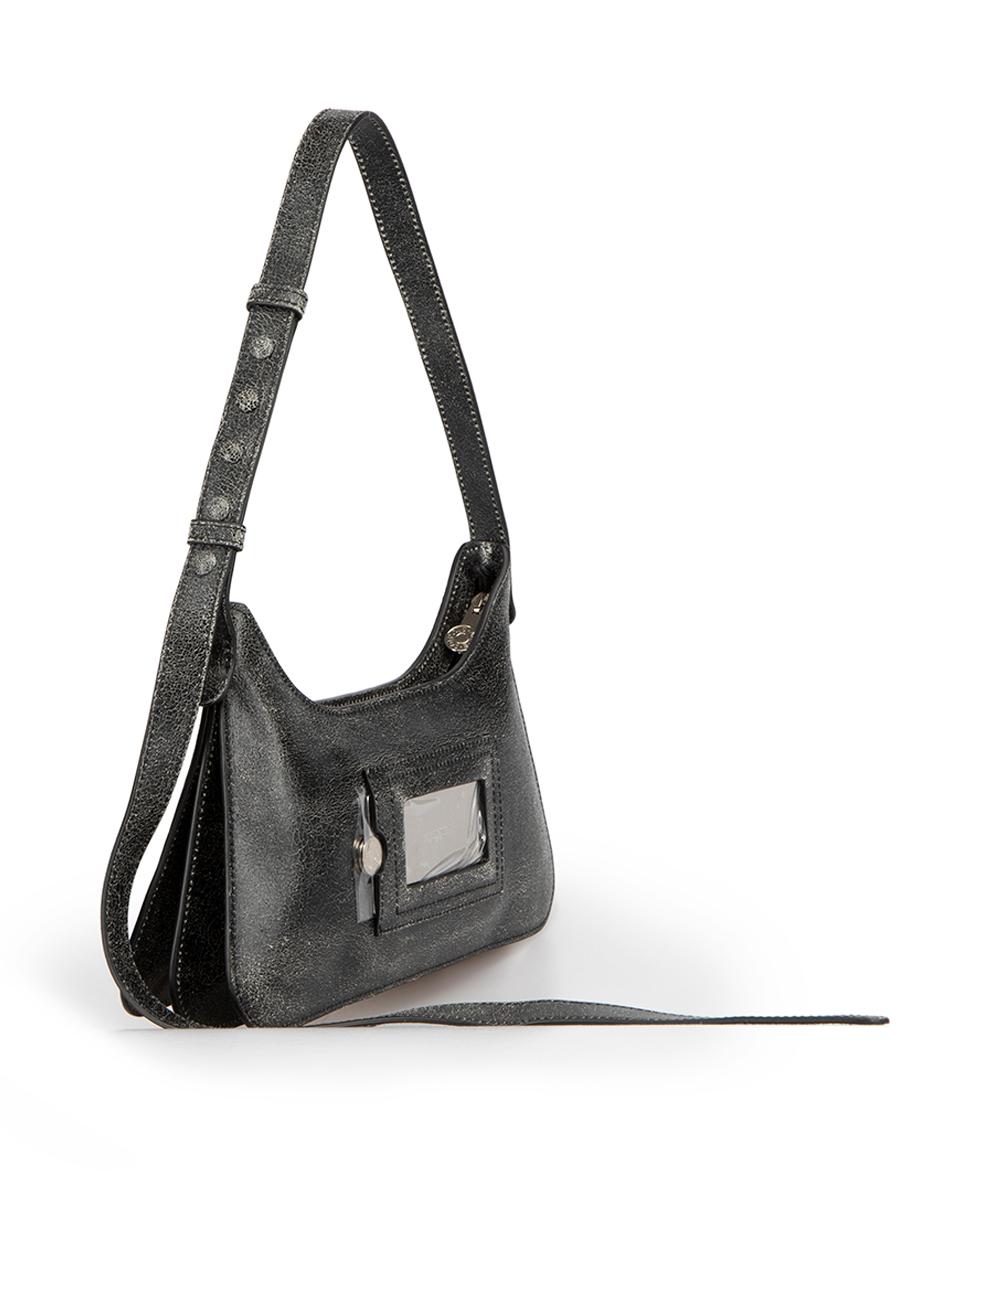 CONDITION is Never worn, with tags. No visible wear to bag is evident on this new Acne Studios designer resale item.



Details


Platt bag

Black

Distressed Leather

Shoulder bag

Silver hardware

Adjustable strap

Front detachable mirror